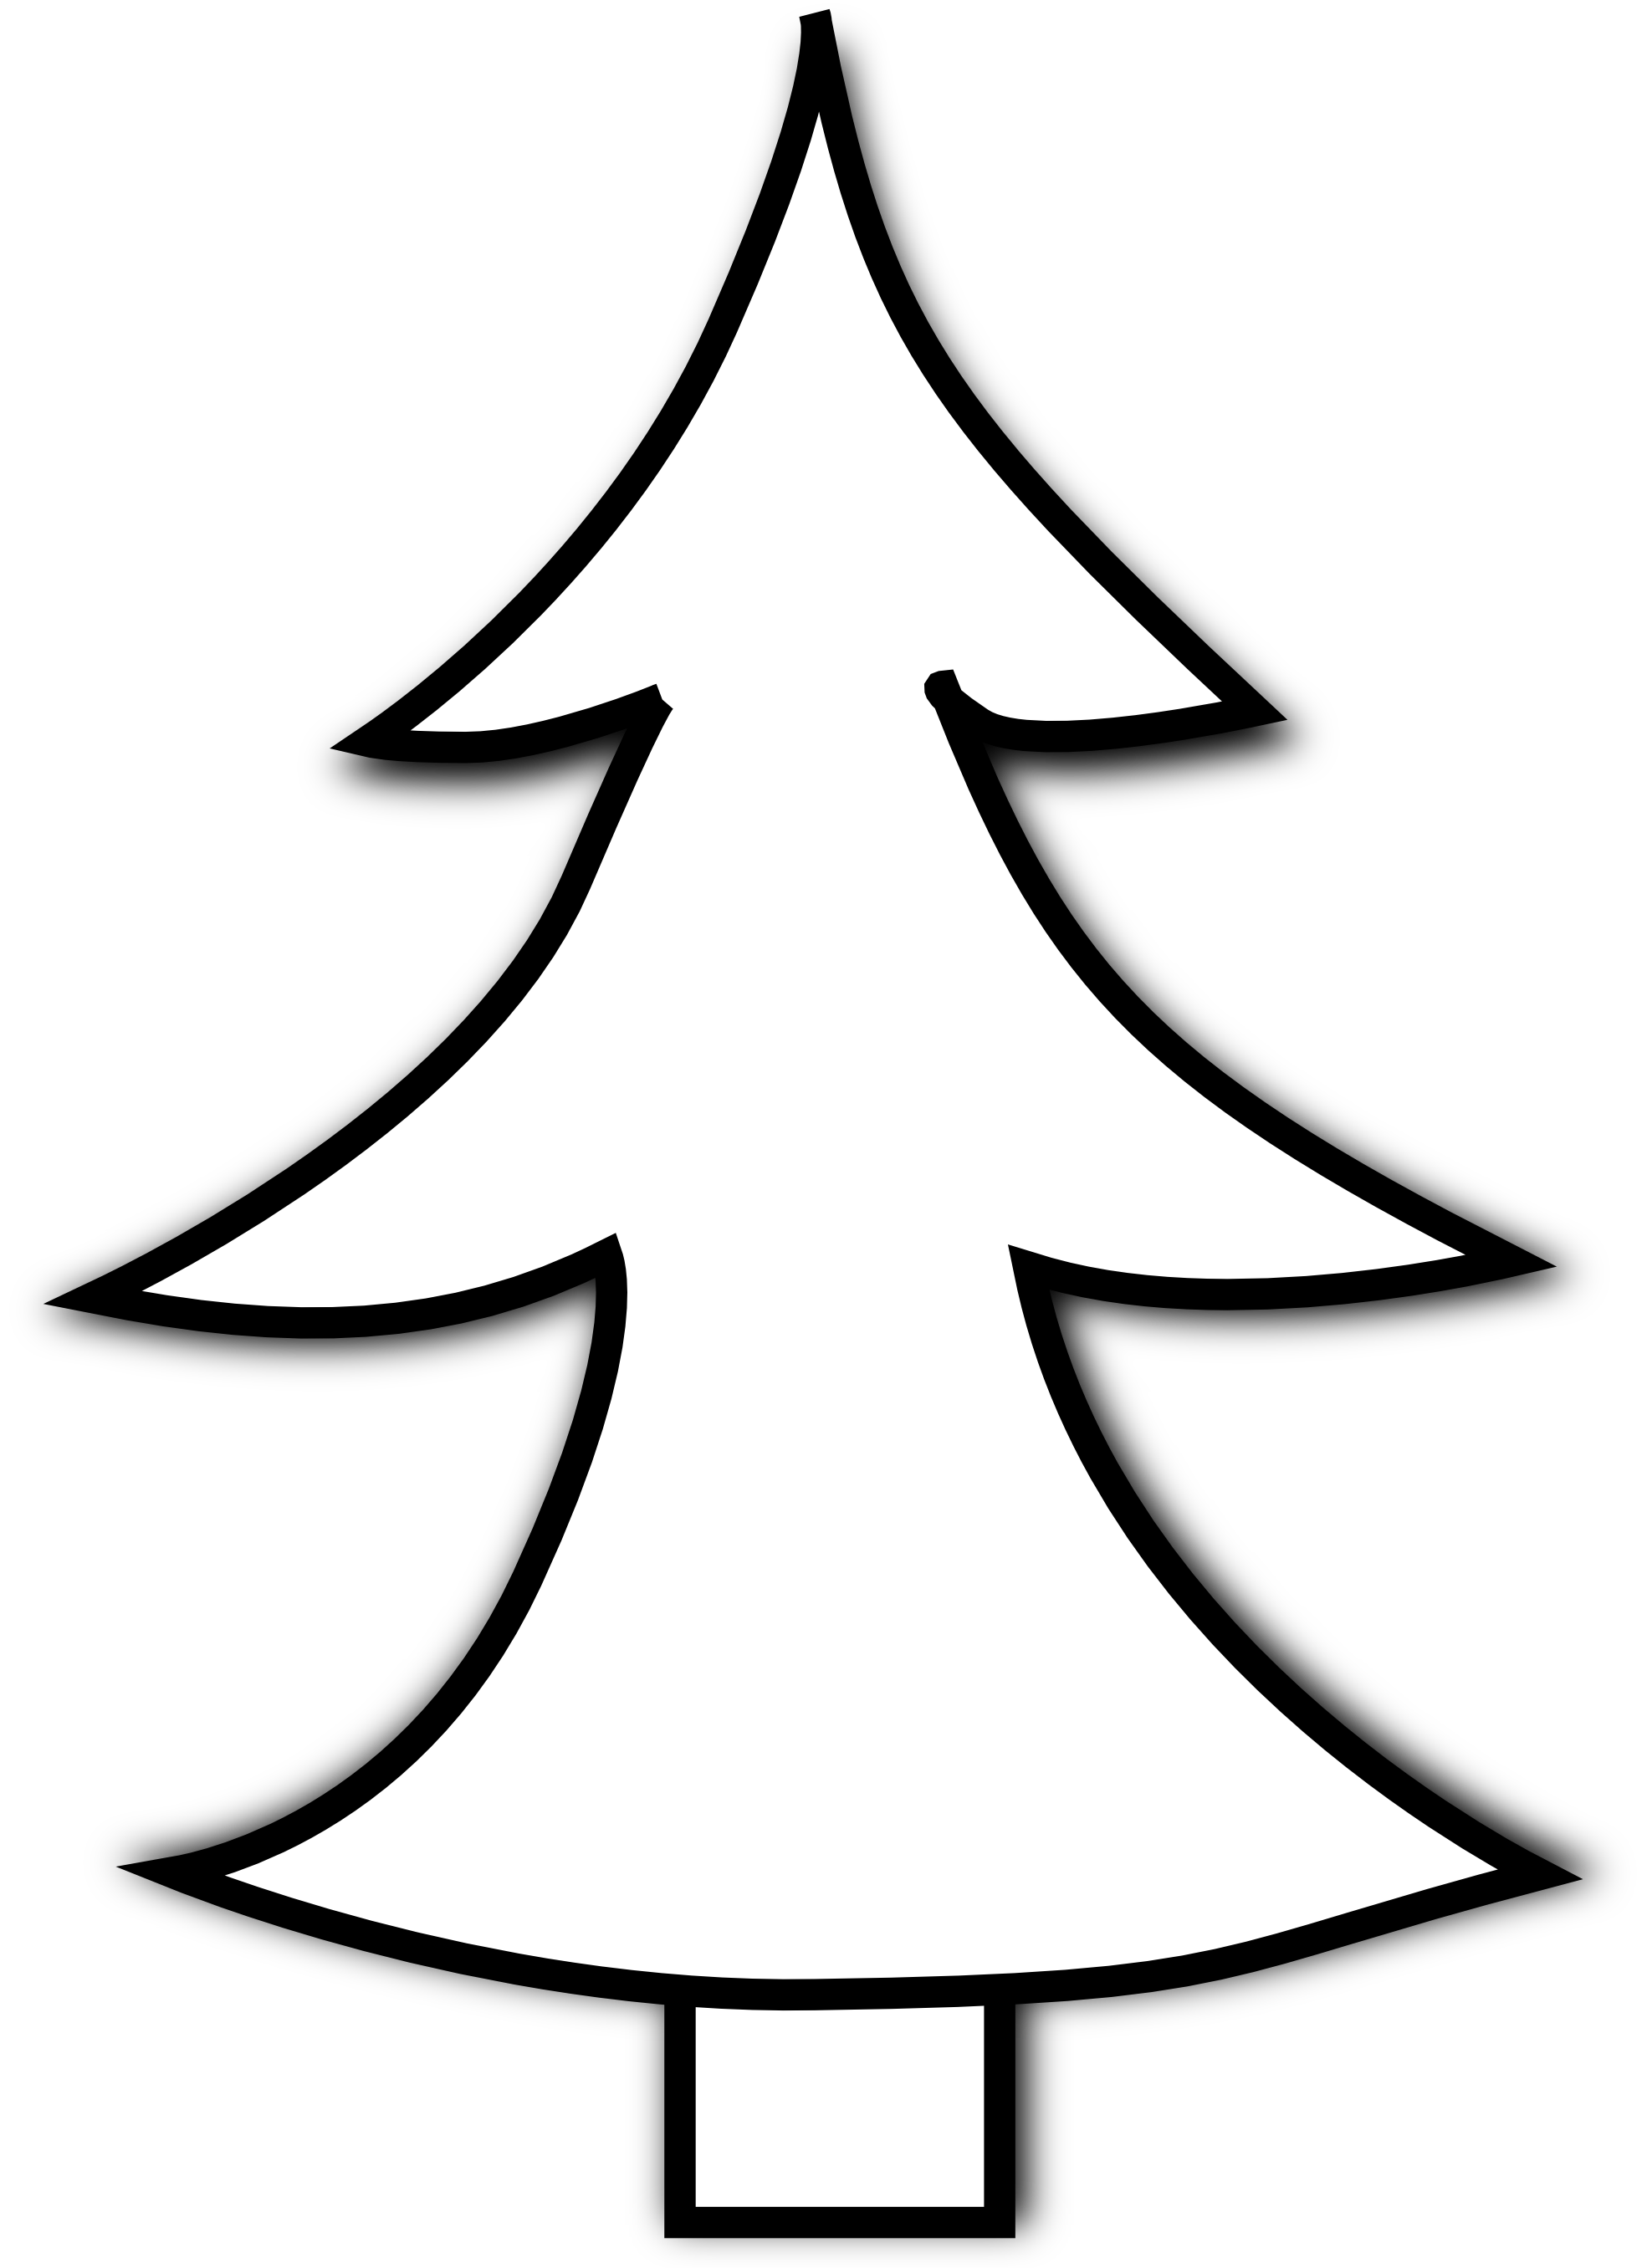 Black And White Christmas Tree - Clipart library